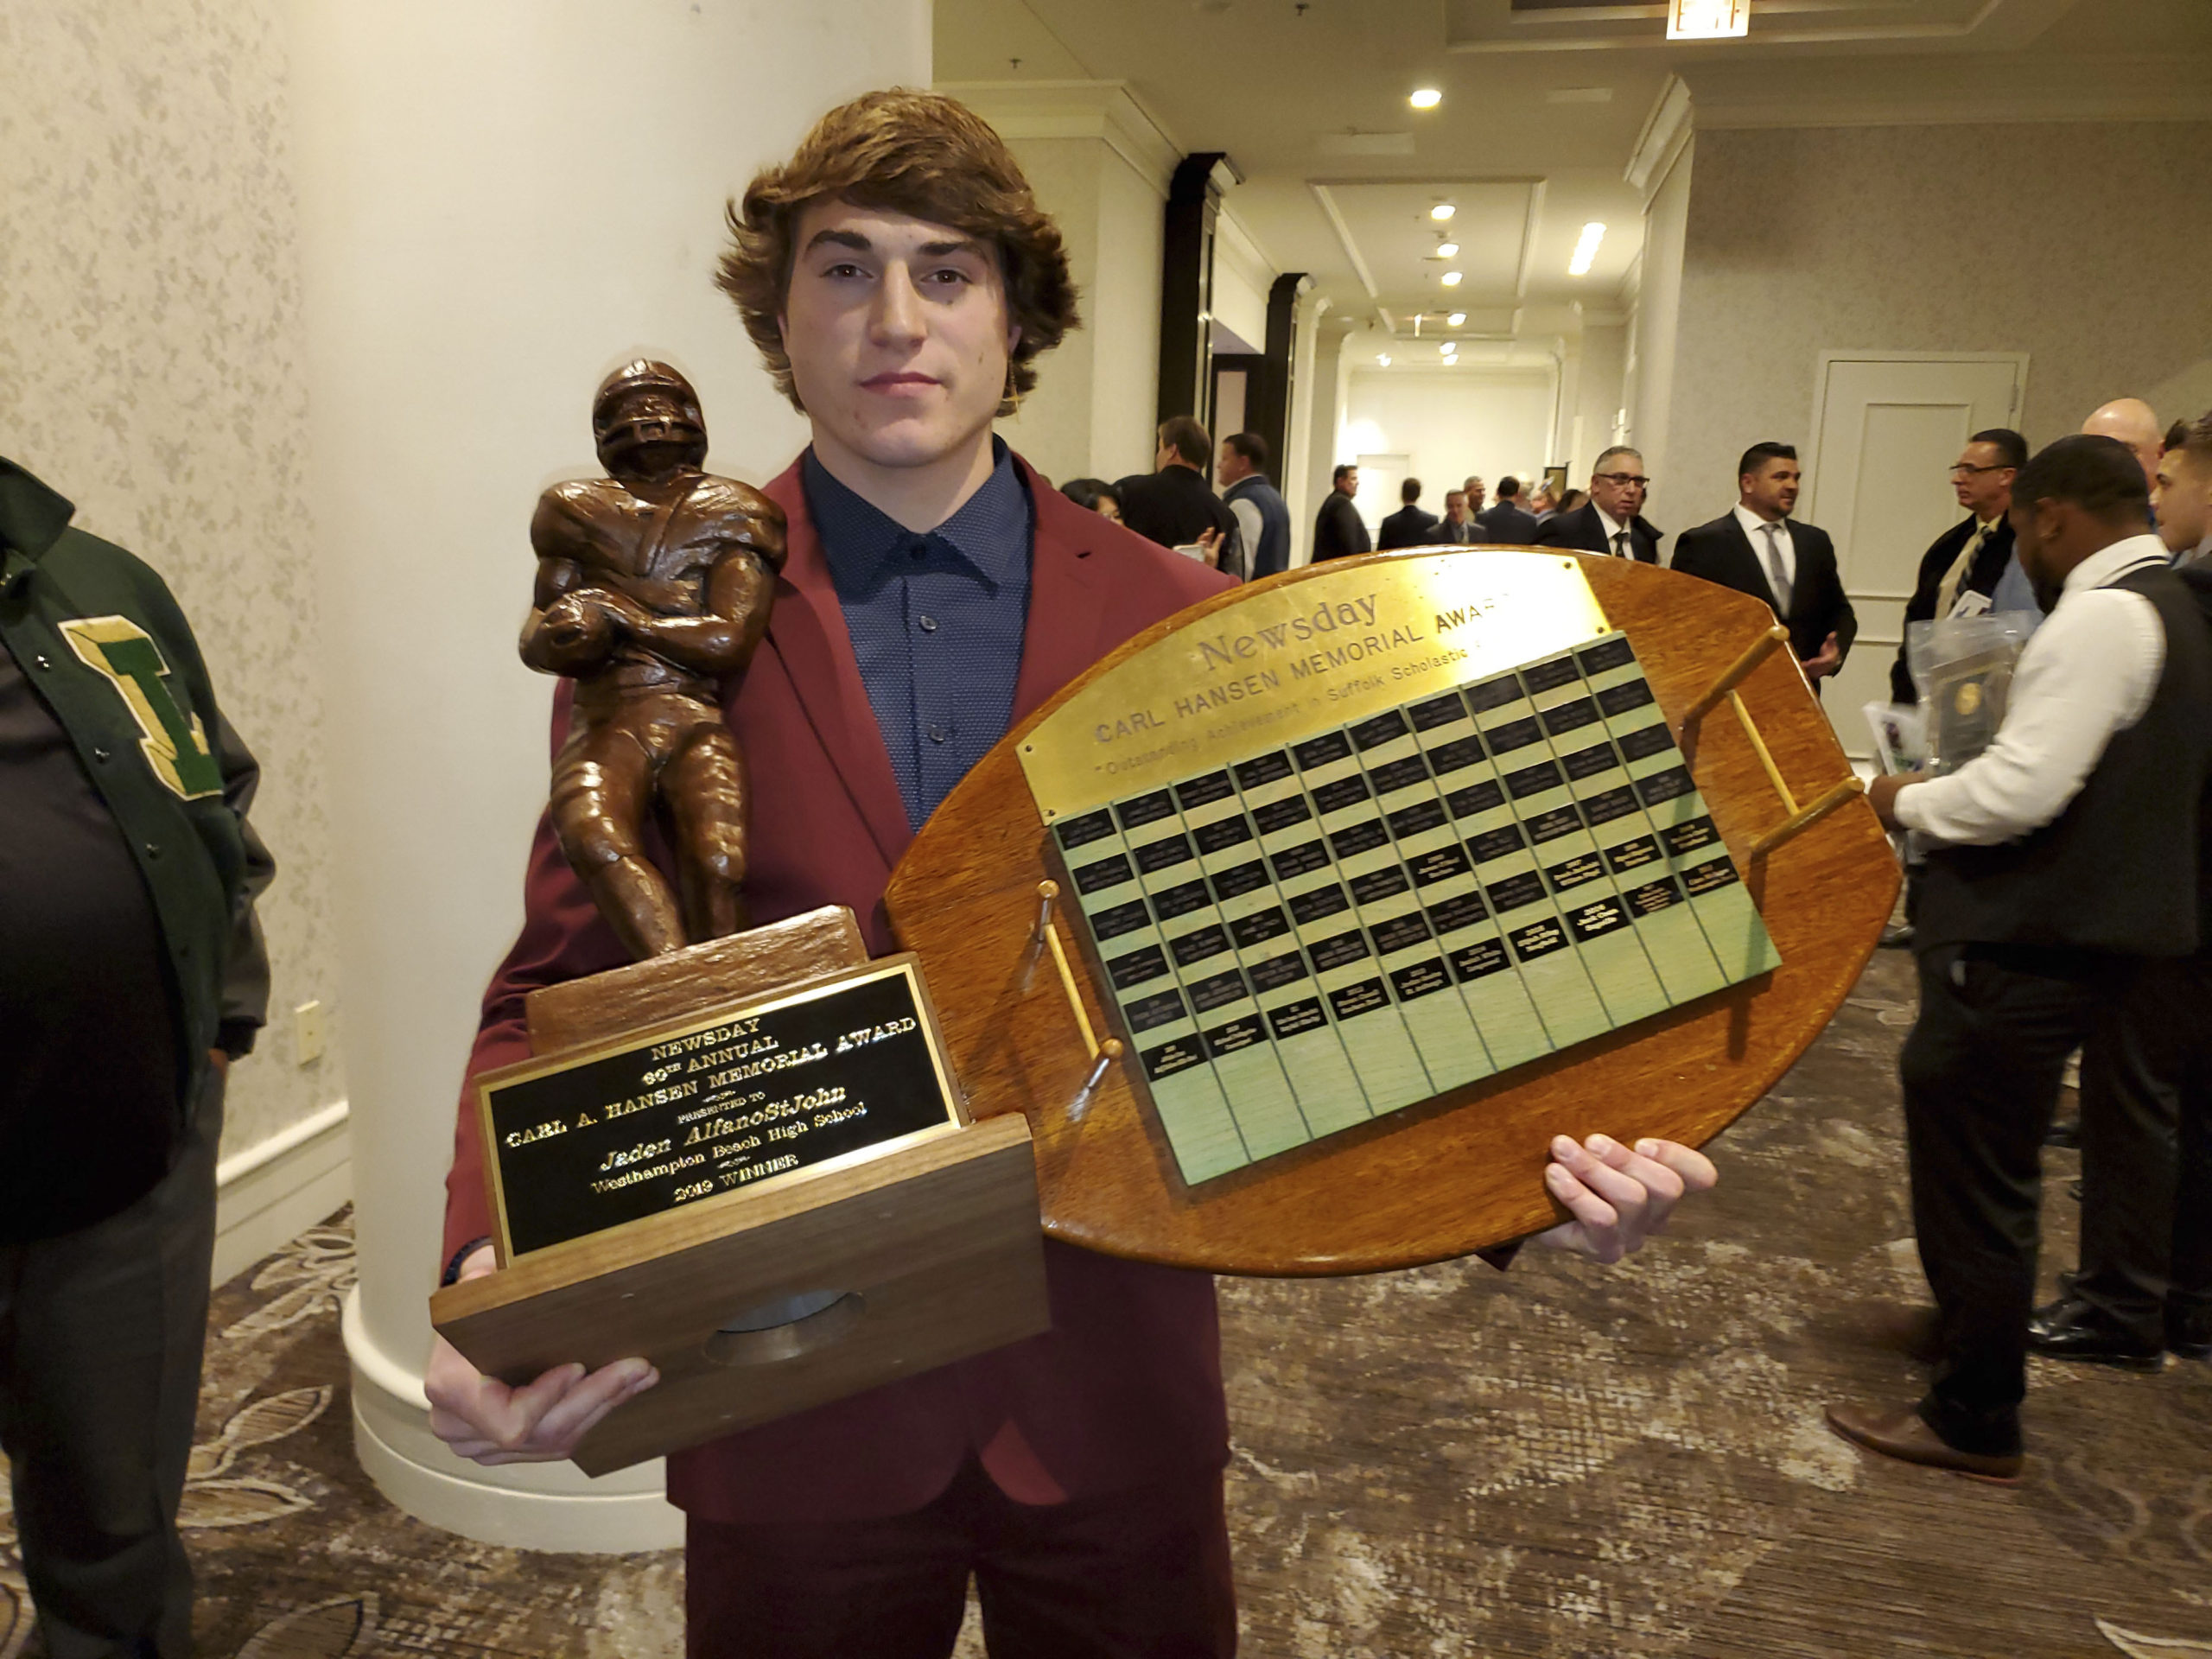 Welcome To Hansenville 
December 5 -- Jaden AlfanoStJohn of Westhampton Beach became the third consecutive Hurricane to win the coveted Carl A. Hansen Award, named after former Westhampton Beach varsity head coach and athletic director and given to the top player in Suffolk County football.